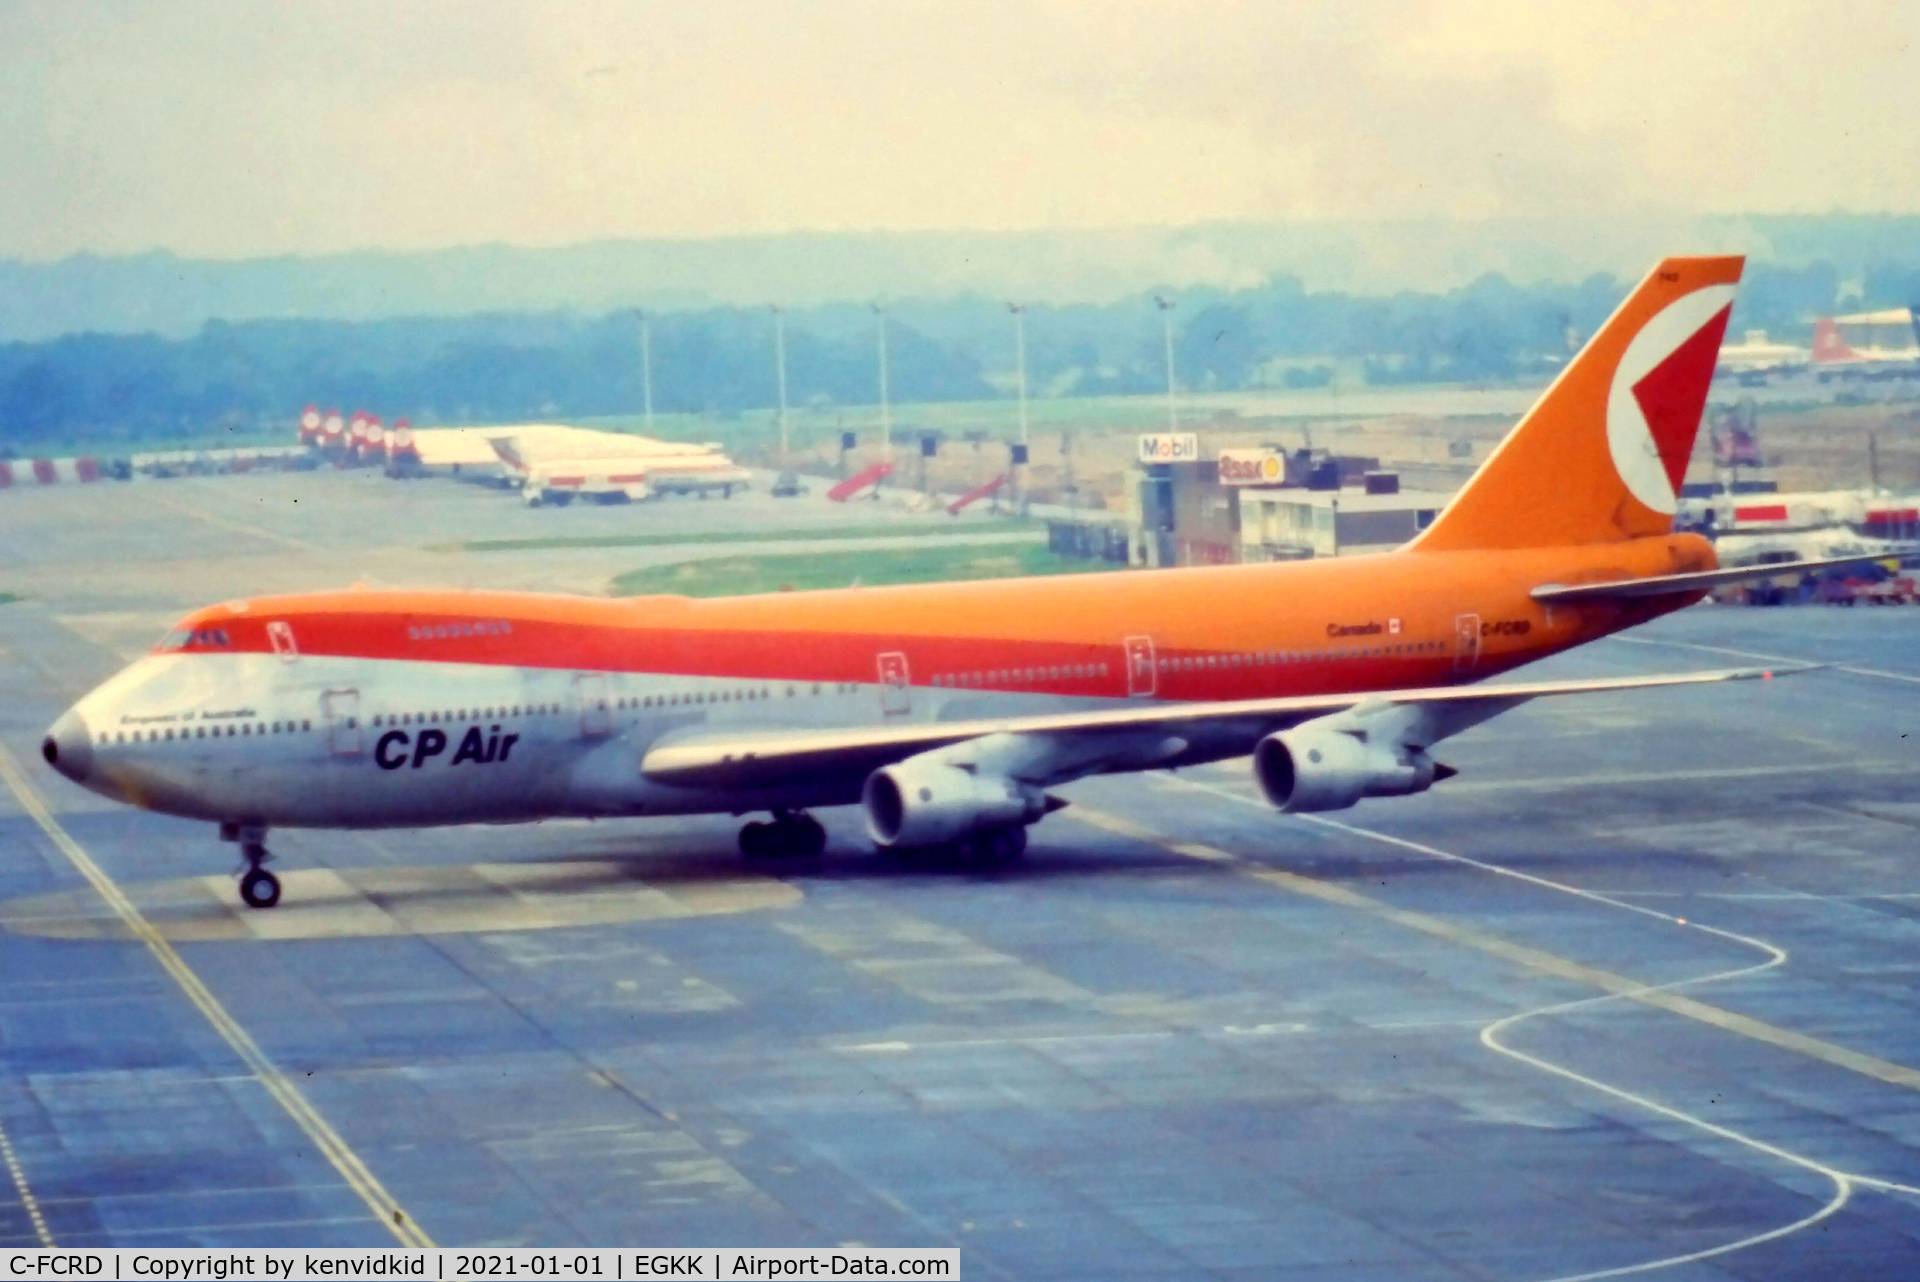 C-FCRD, 1974 Boeing 747-217B C/N 20927, At London Gatwick, early 1980's.